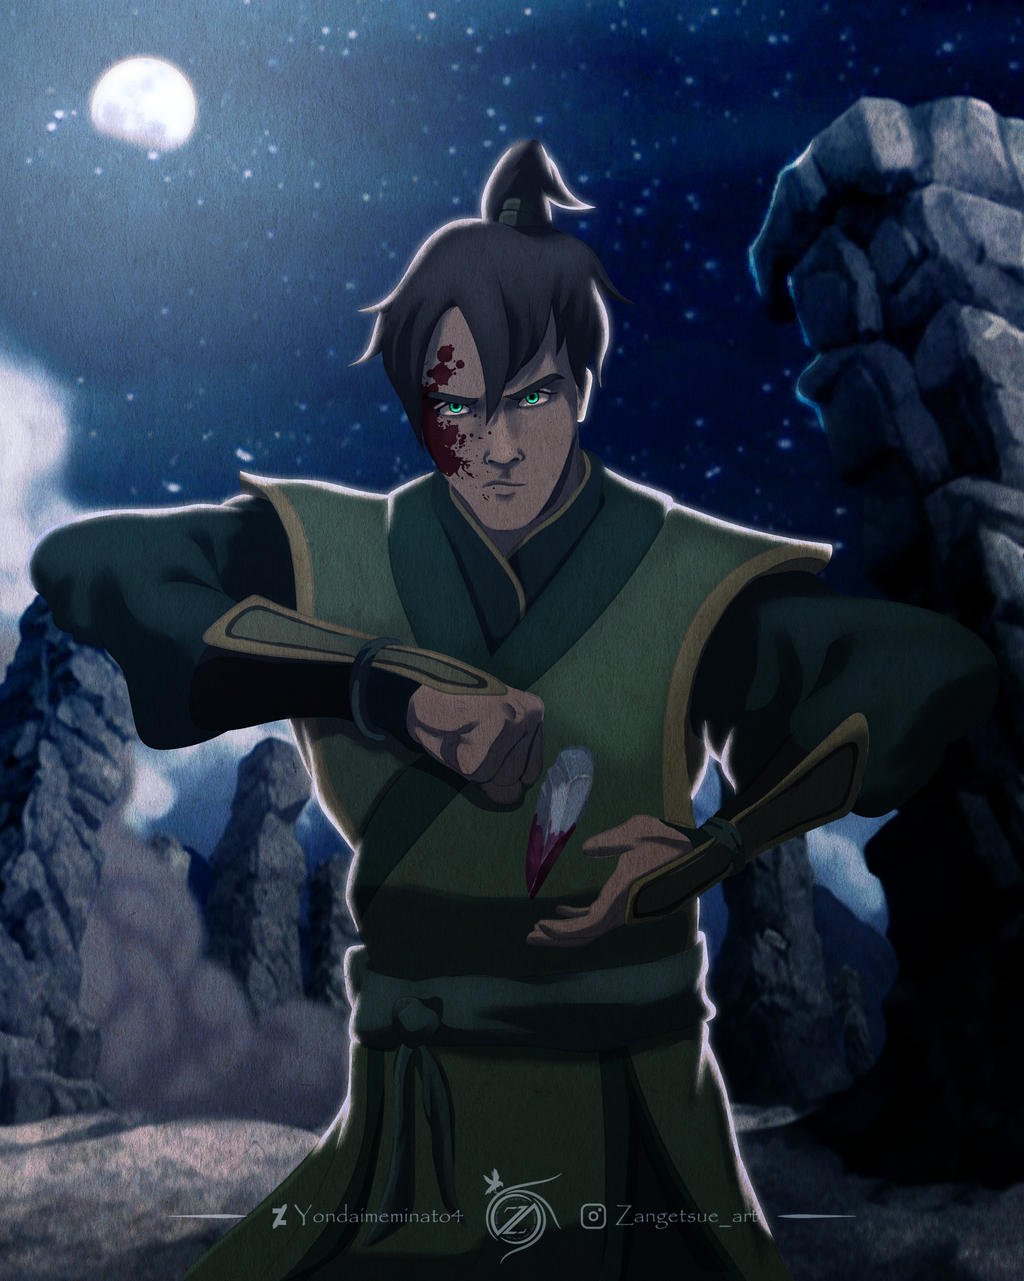 How The Rise of Kyoshi builds on Avatar: The Last Airbender